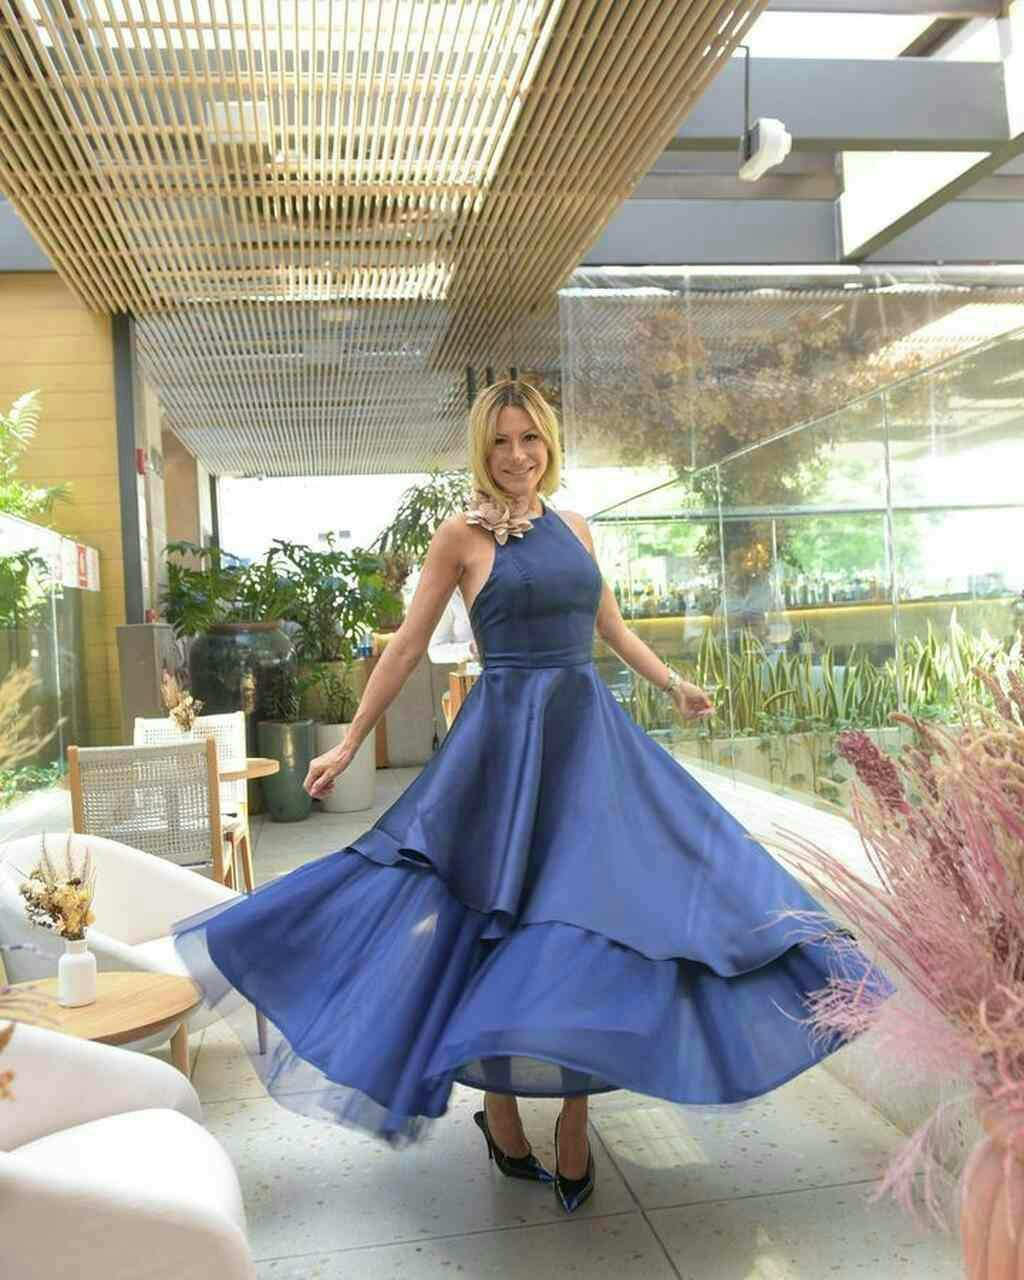 clothing dress evening dress formal wear fashion gown person costume wedding wedding gown